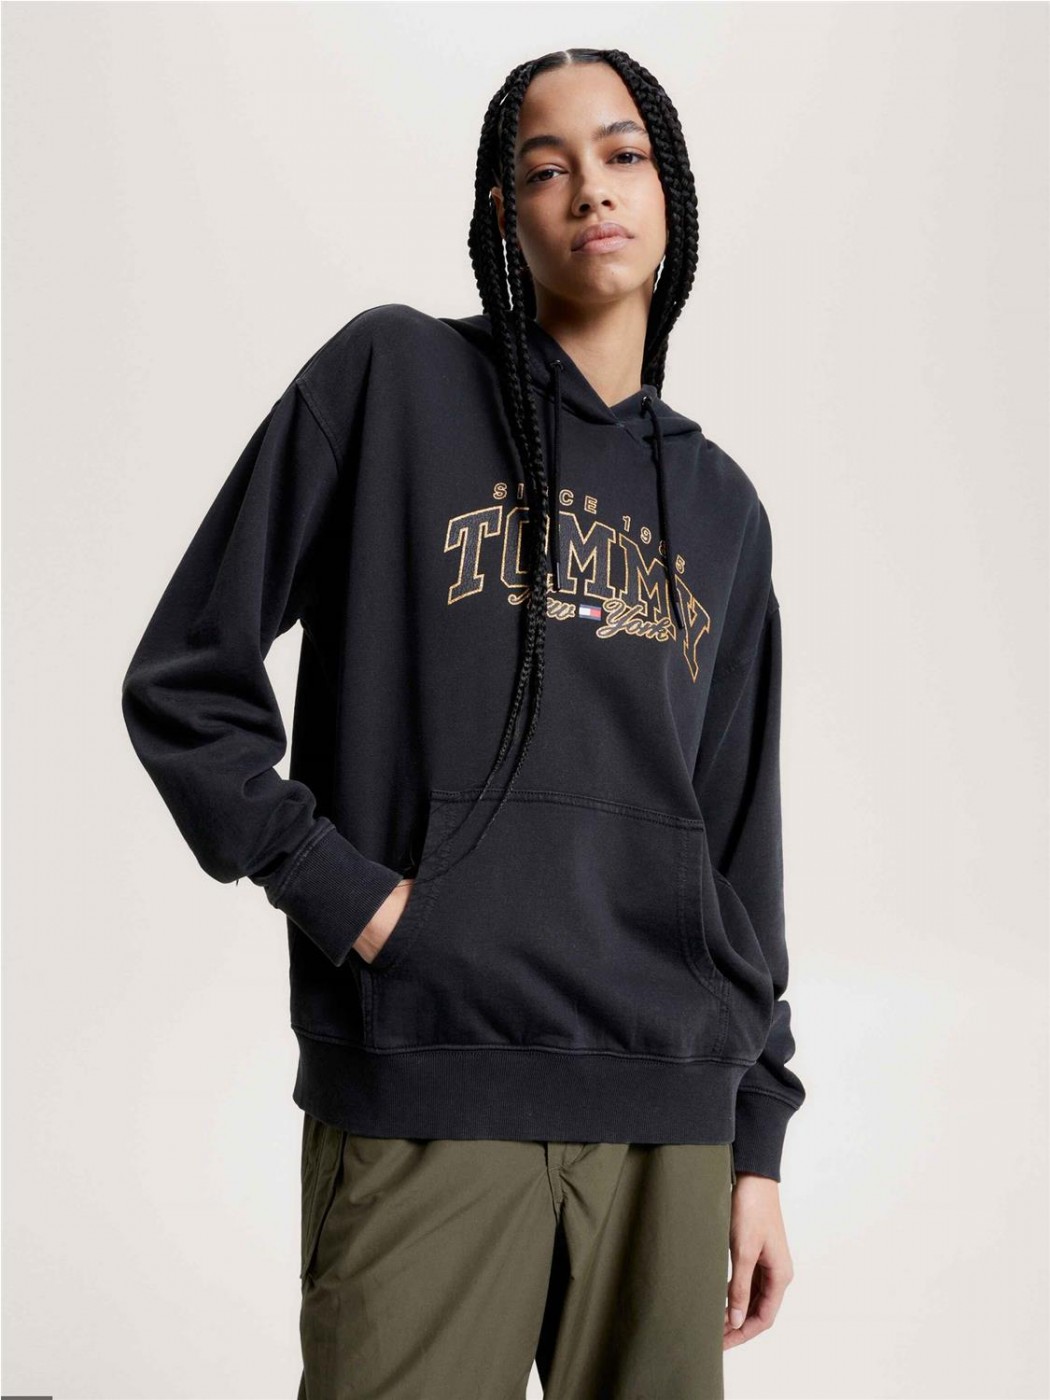 SUDADERA TOMMY JEANS MUJER...